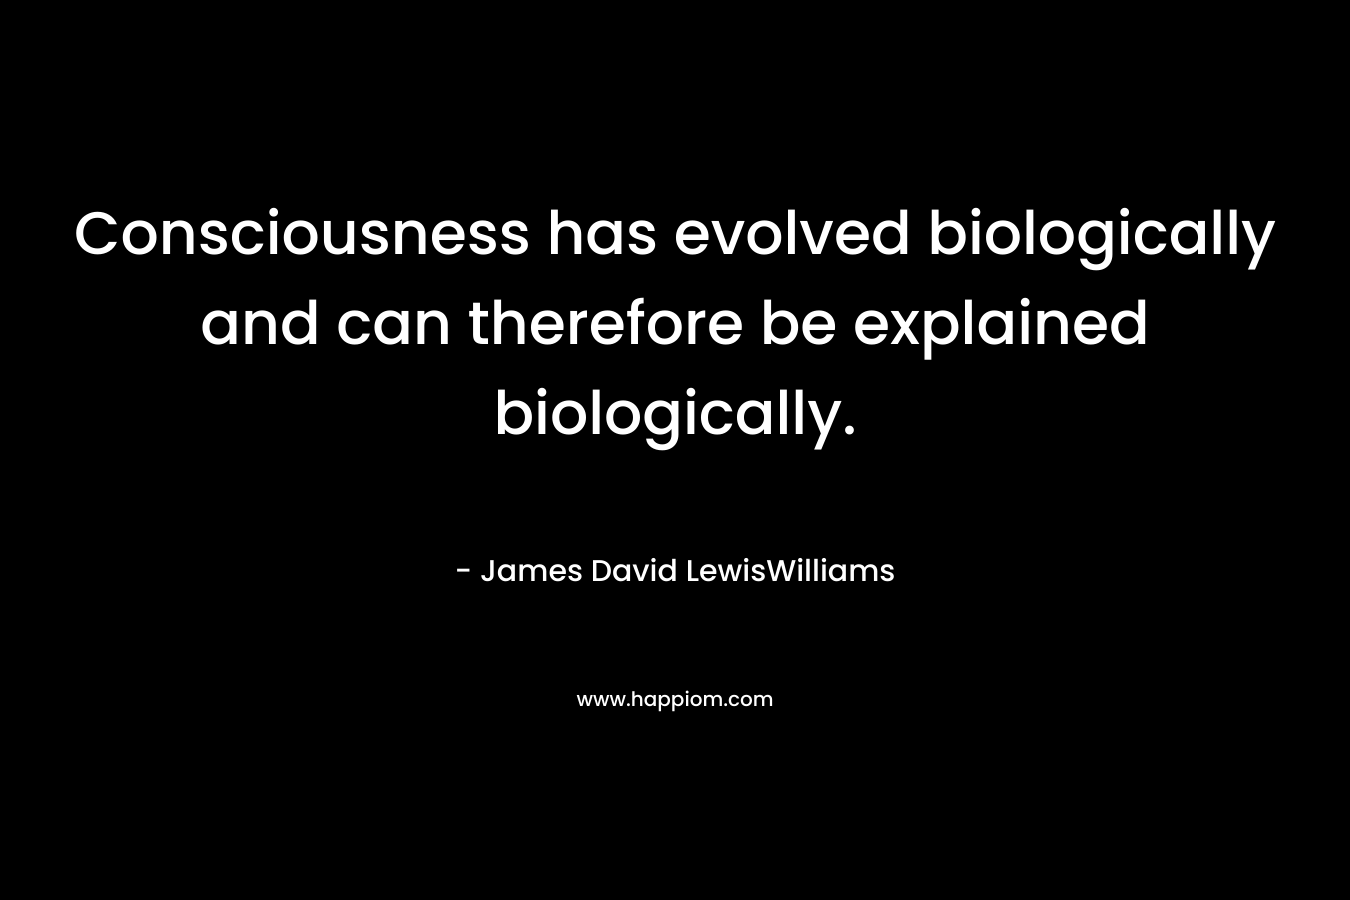 Consciousness has evolved biologically and can therefore be explained biologically. – James David LewisWilliams